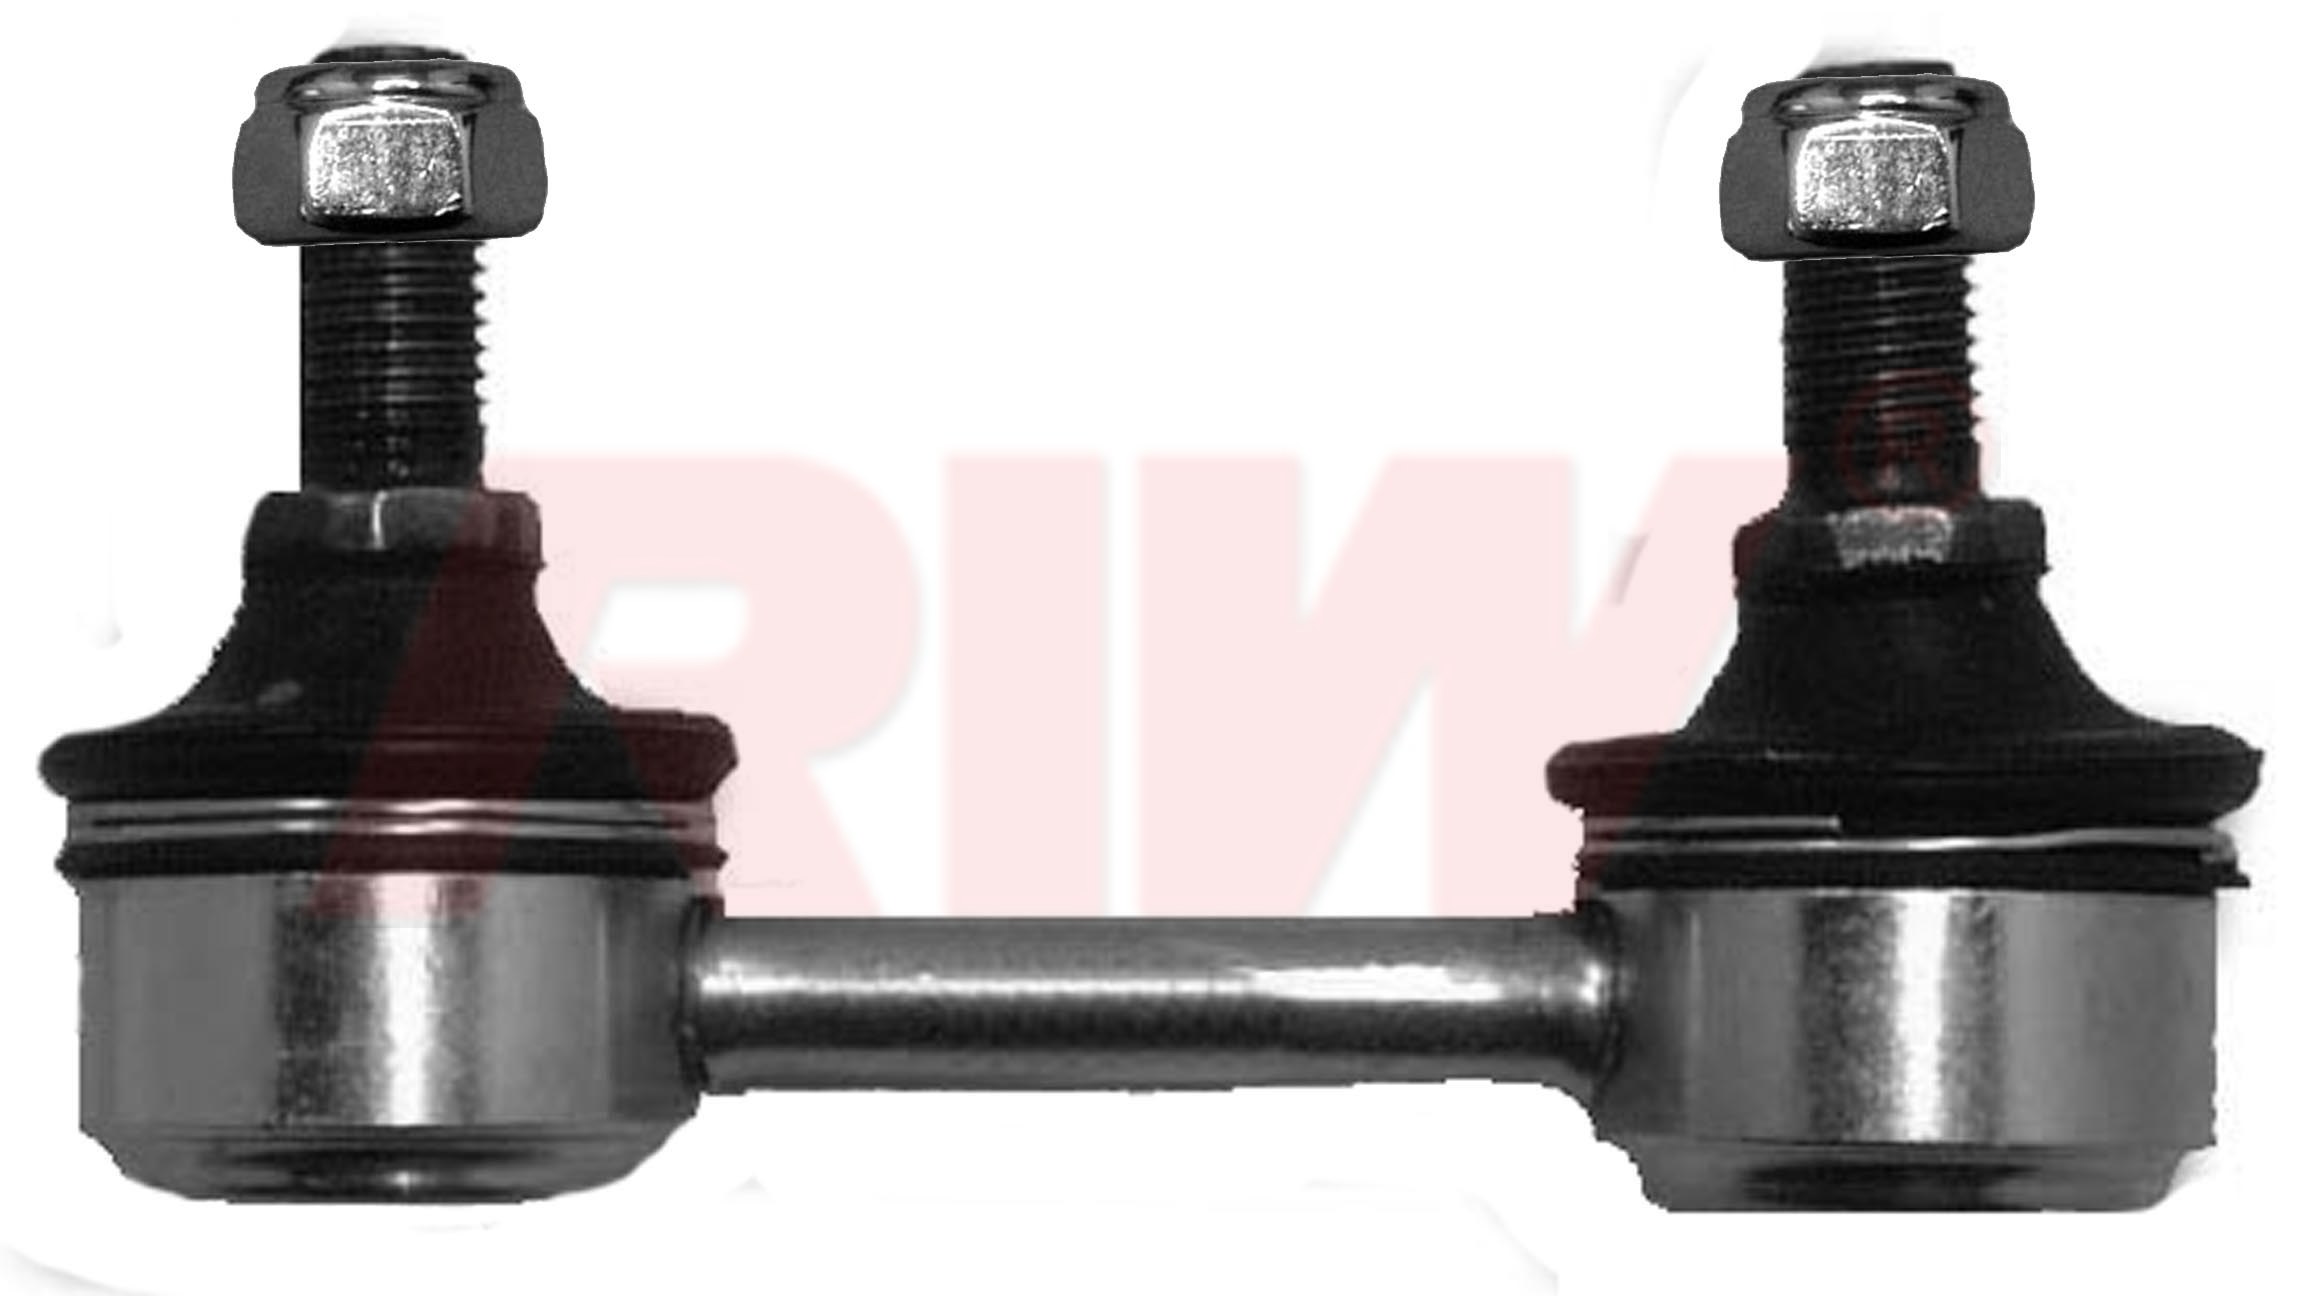 HYUNDAI COUPE (RD) 1996 - 2002 Link Stabilizer